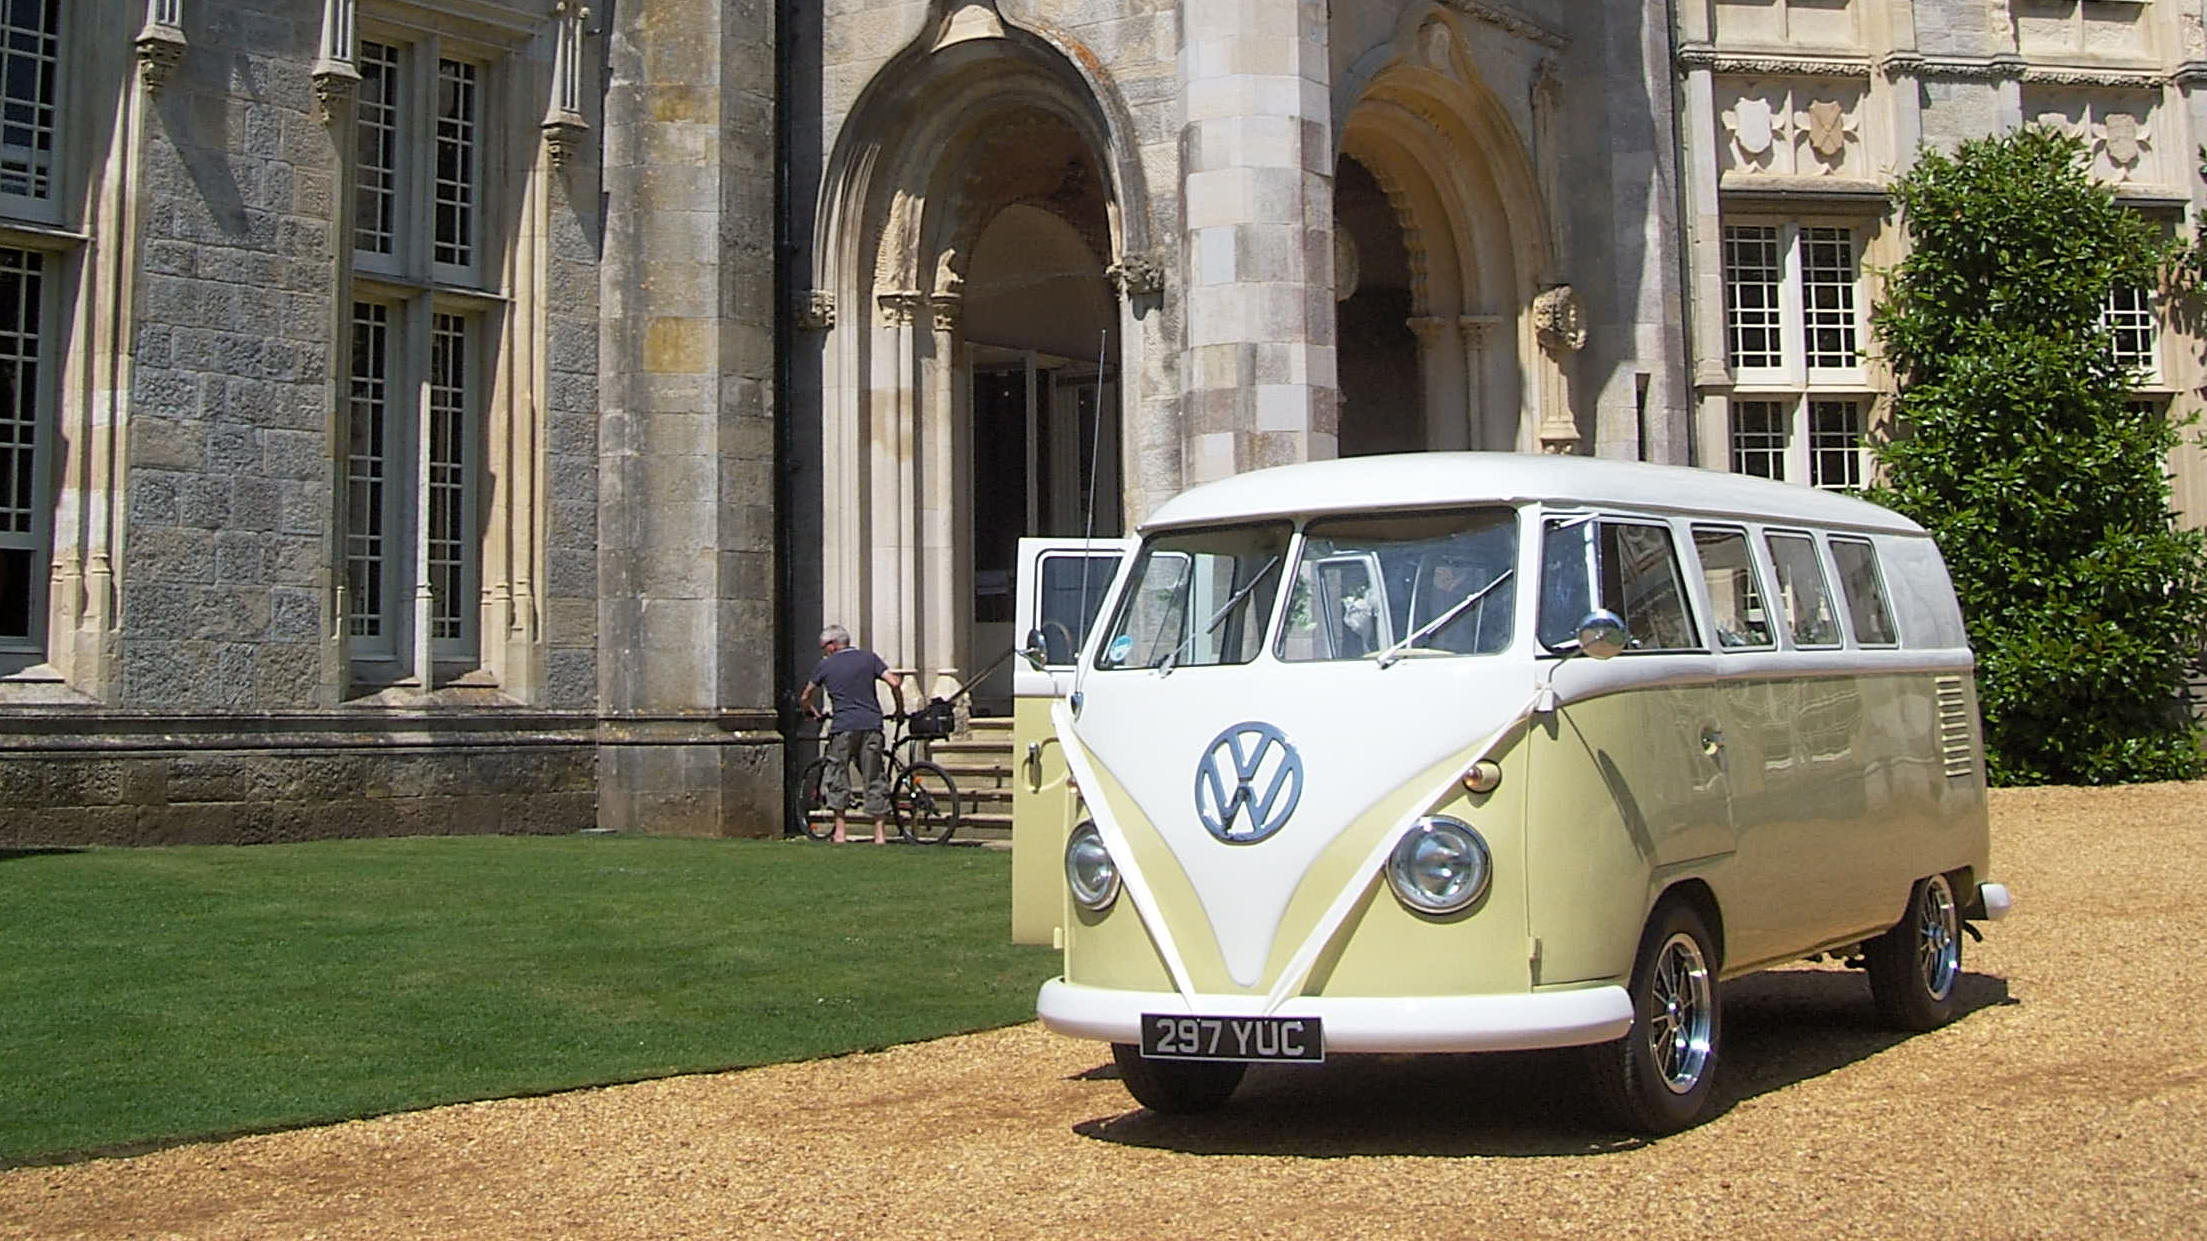 Retro Classic Volkswagen Campervan decorated with white ribbons at a local Tolpuddle wedding venue.